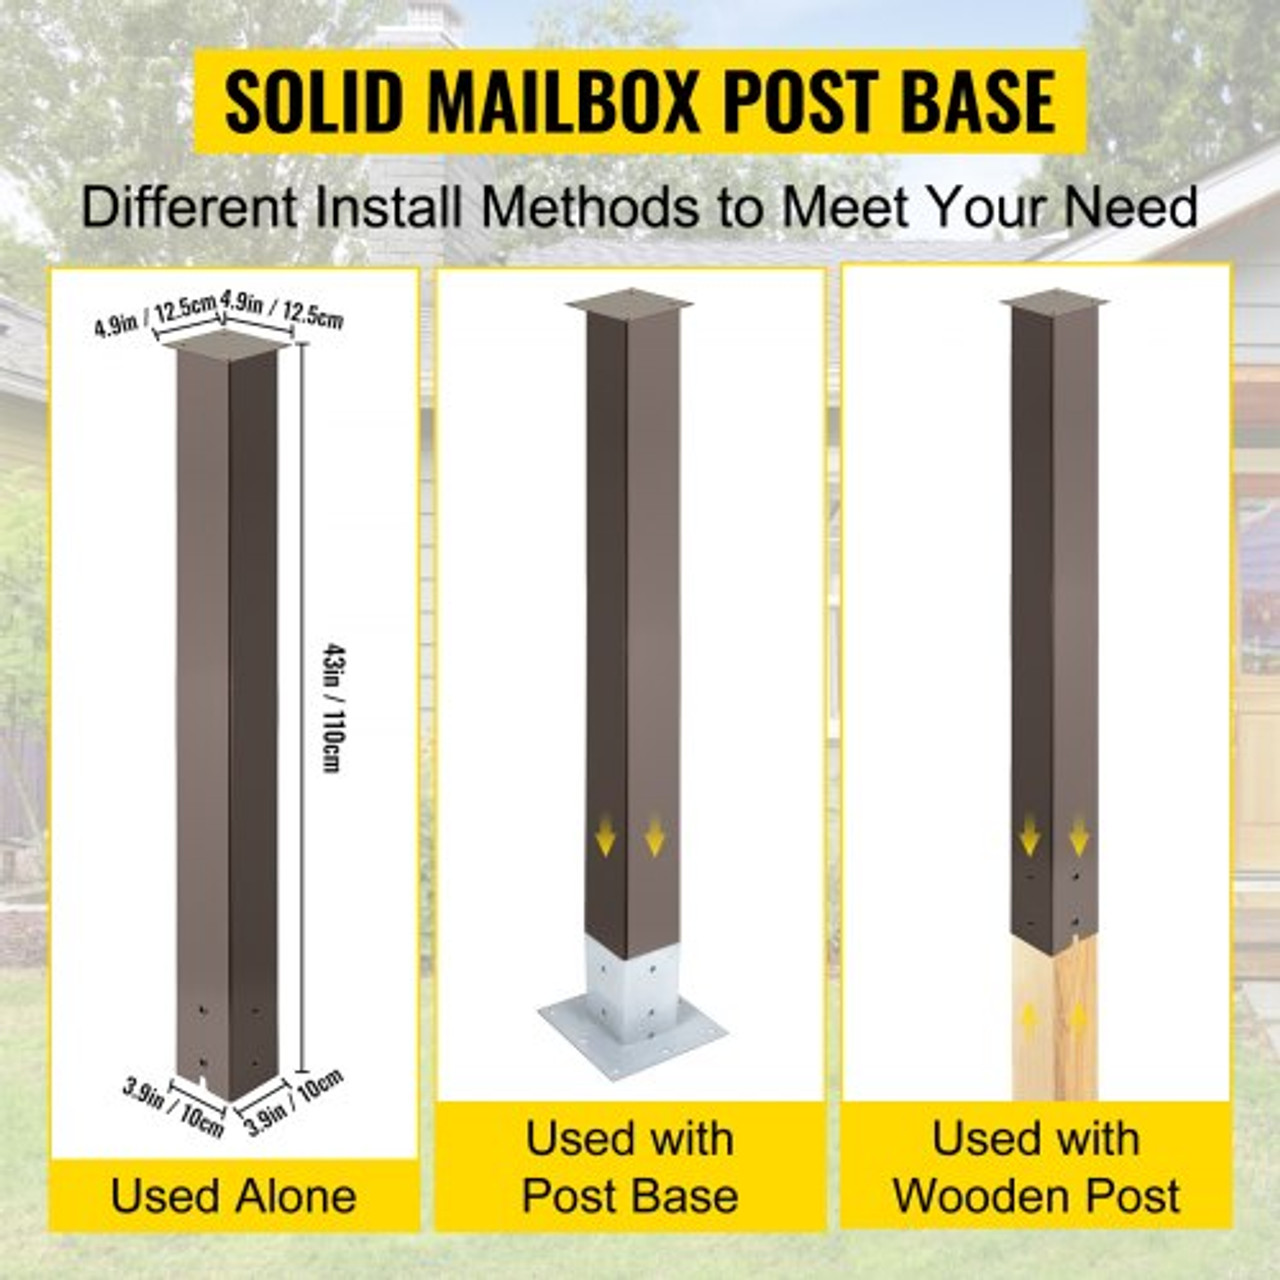 Mailbox Post, 43" High Mailbox Stand, Bronze Powder-Coated Mail Box Post Kit, Q235 Steel Post Stand Surface Mount Post for Sidewalk and Street Curbside, Universal Mail Post for Outdoor Mailbox